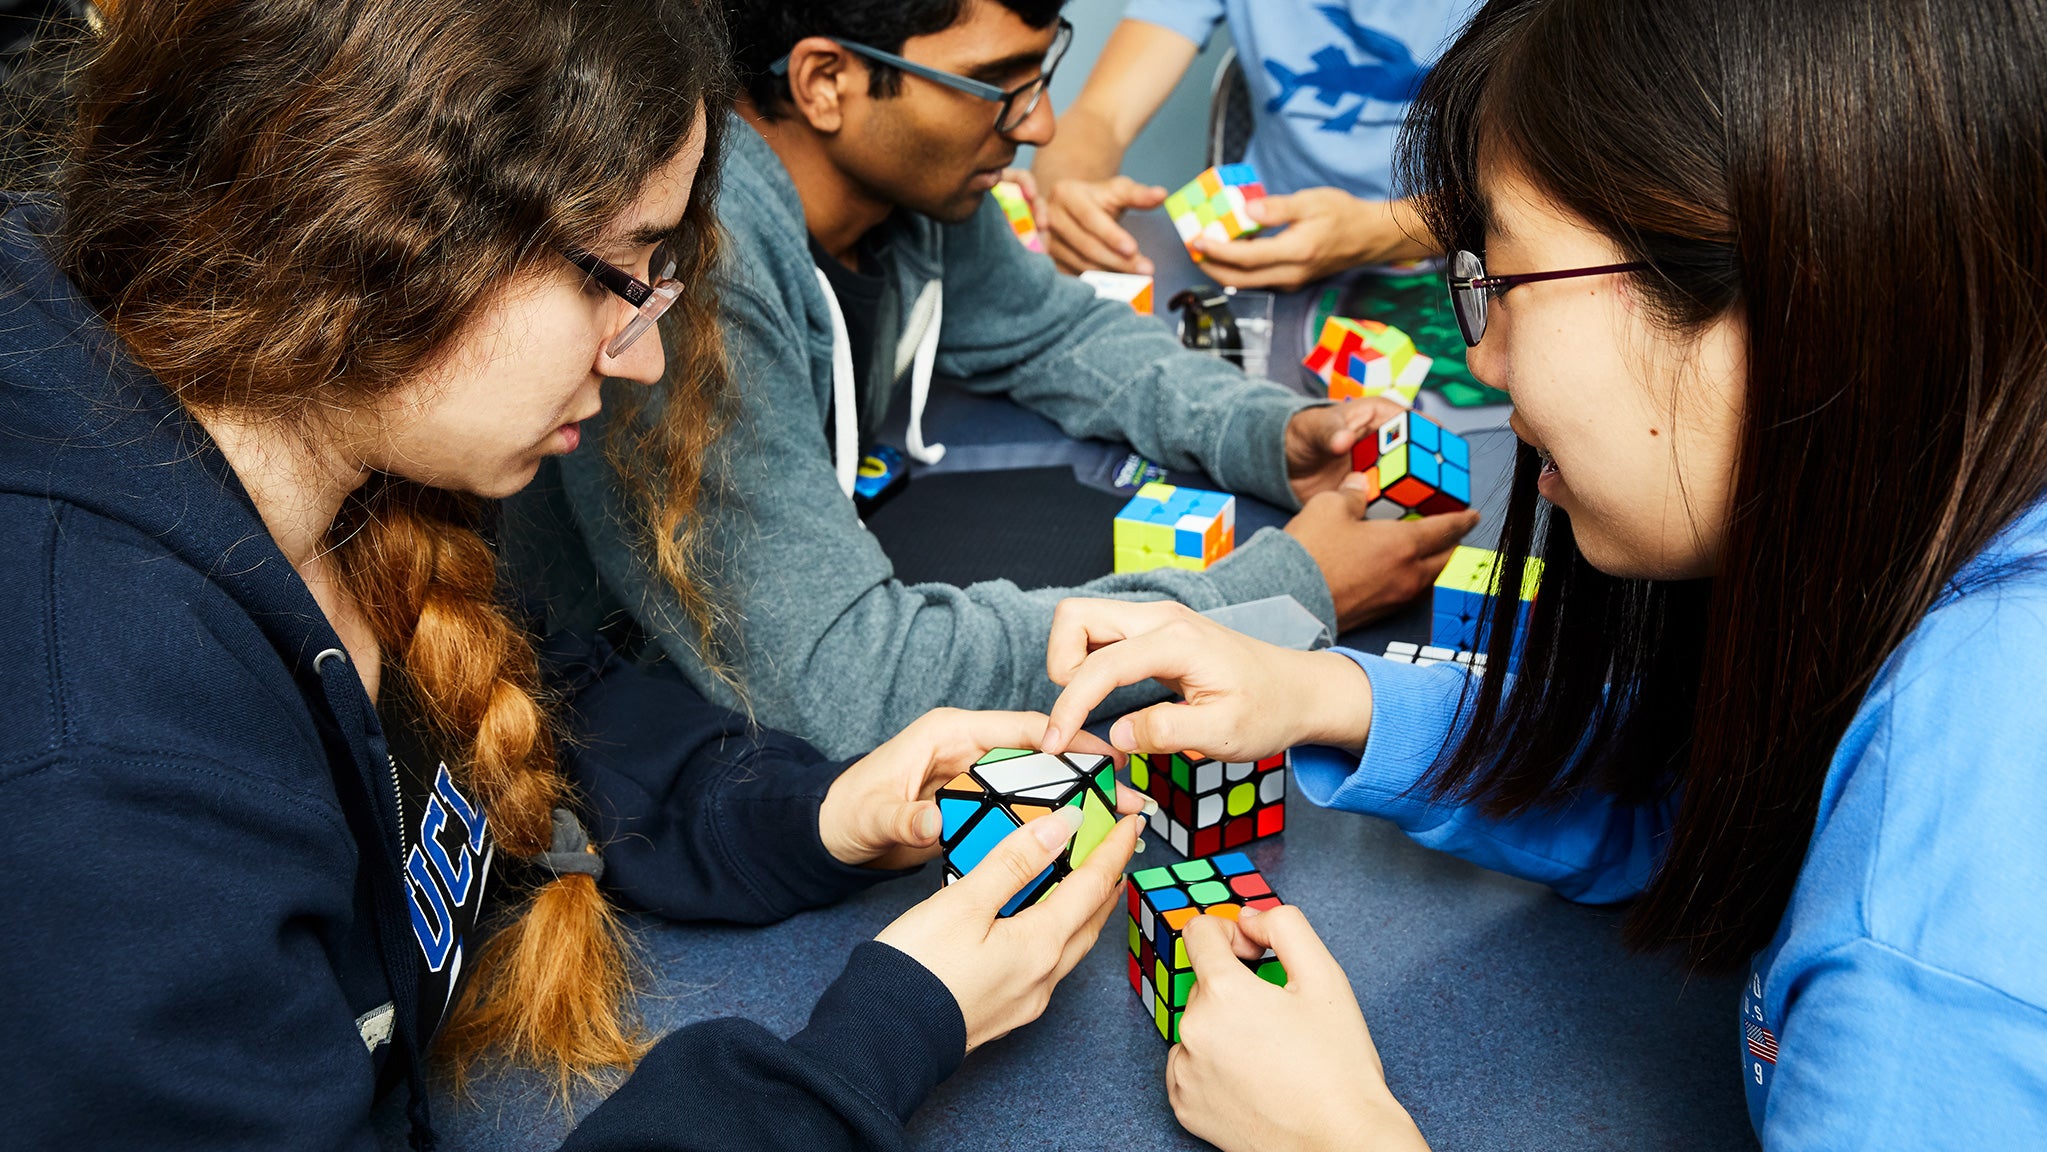 Cubing Club at UCLA members pose together with their Rubik’s Cubes.